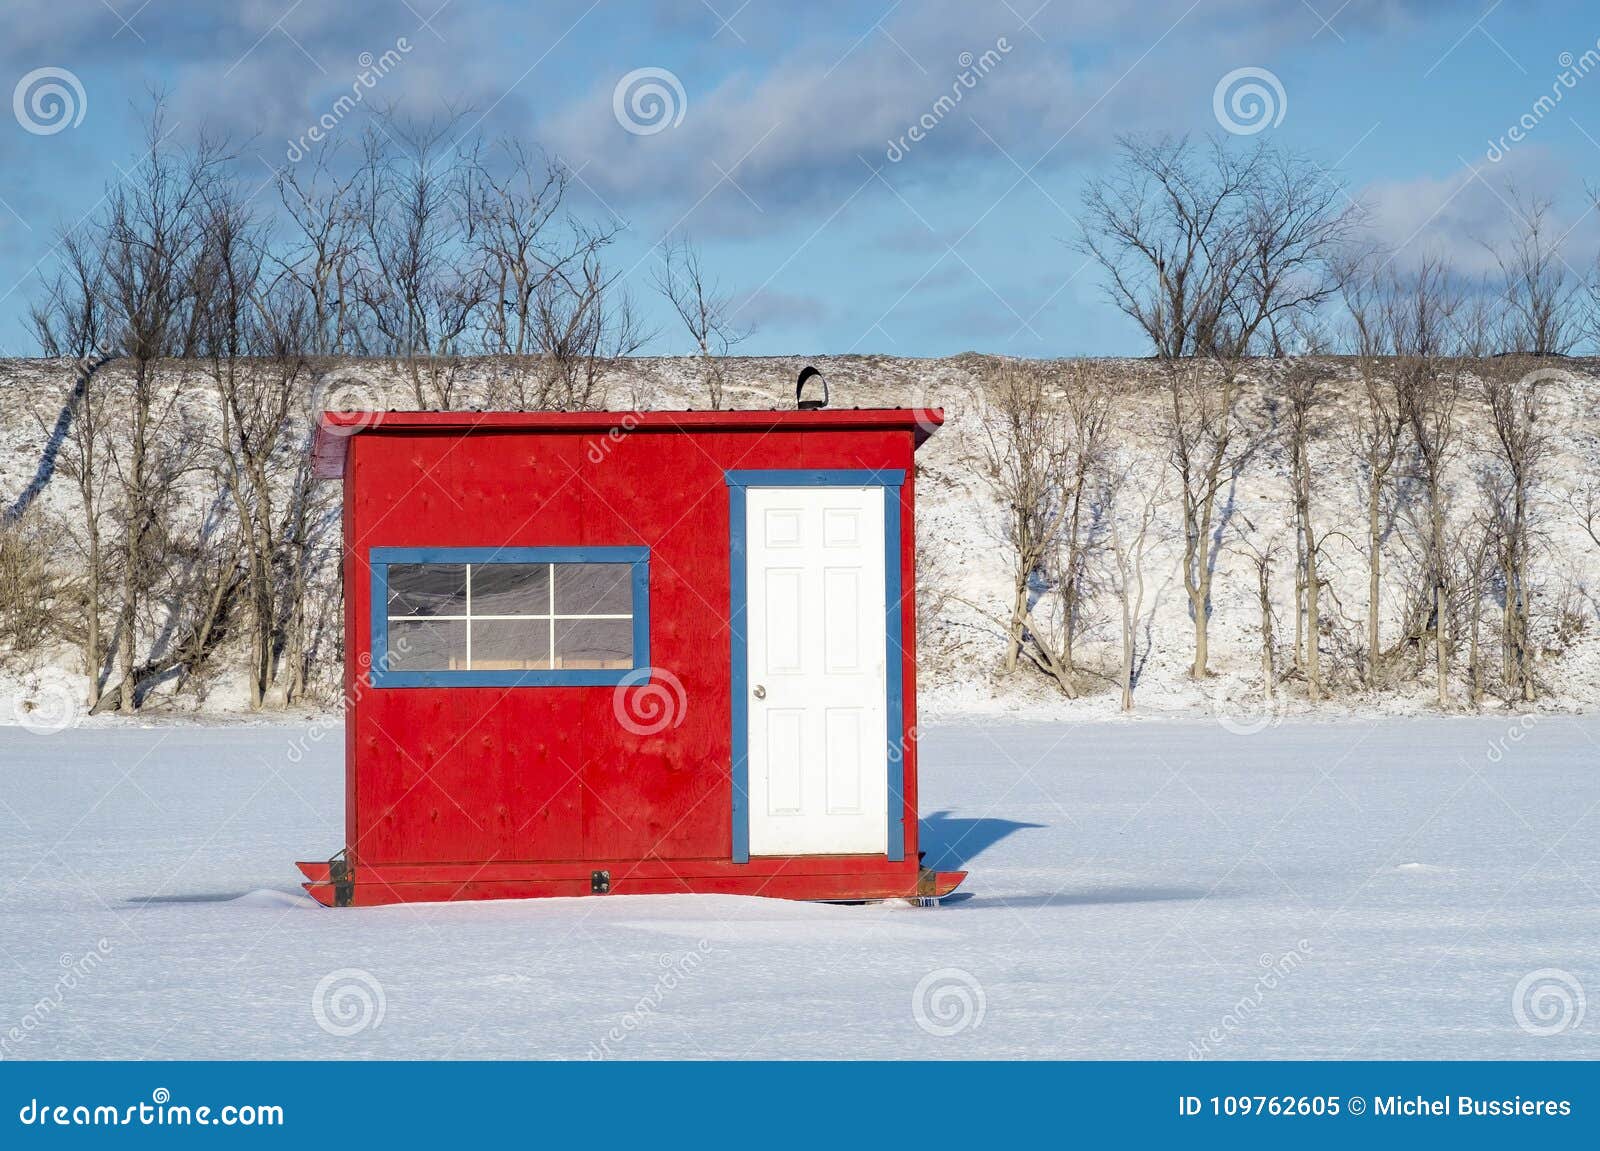 https://thumbs.dreamstime.com/z/white-blue-red-ice-fishing-cabin-cabins-bench-vast-spaces-frozen-rivi%C3%A8re-des-mille-%C3%AEles-ste-rose-laval-quebec-109762605.jpg